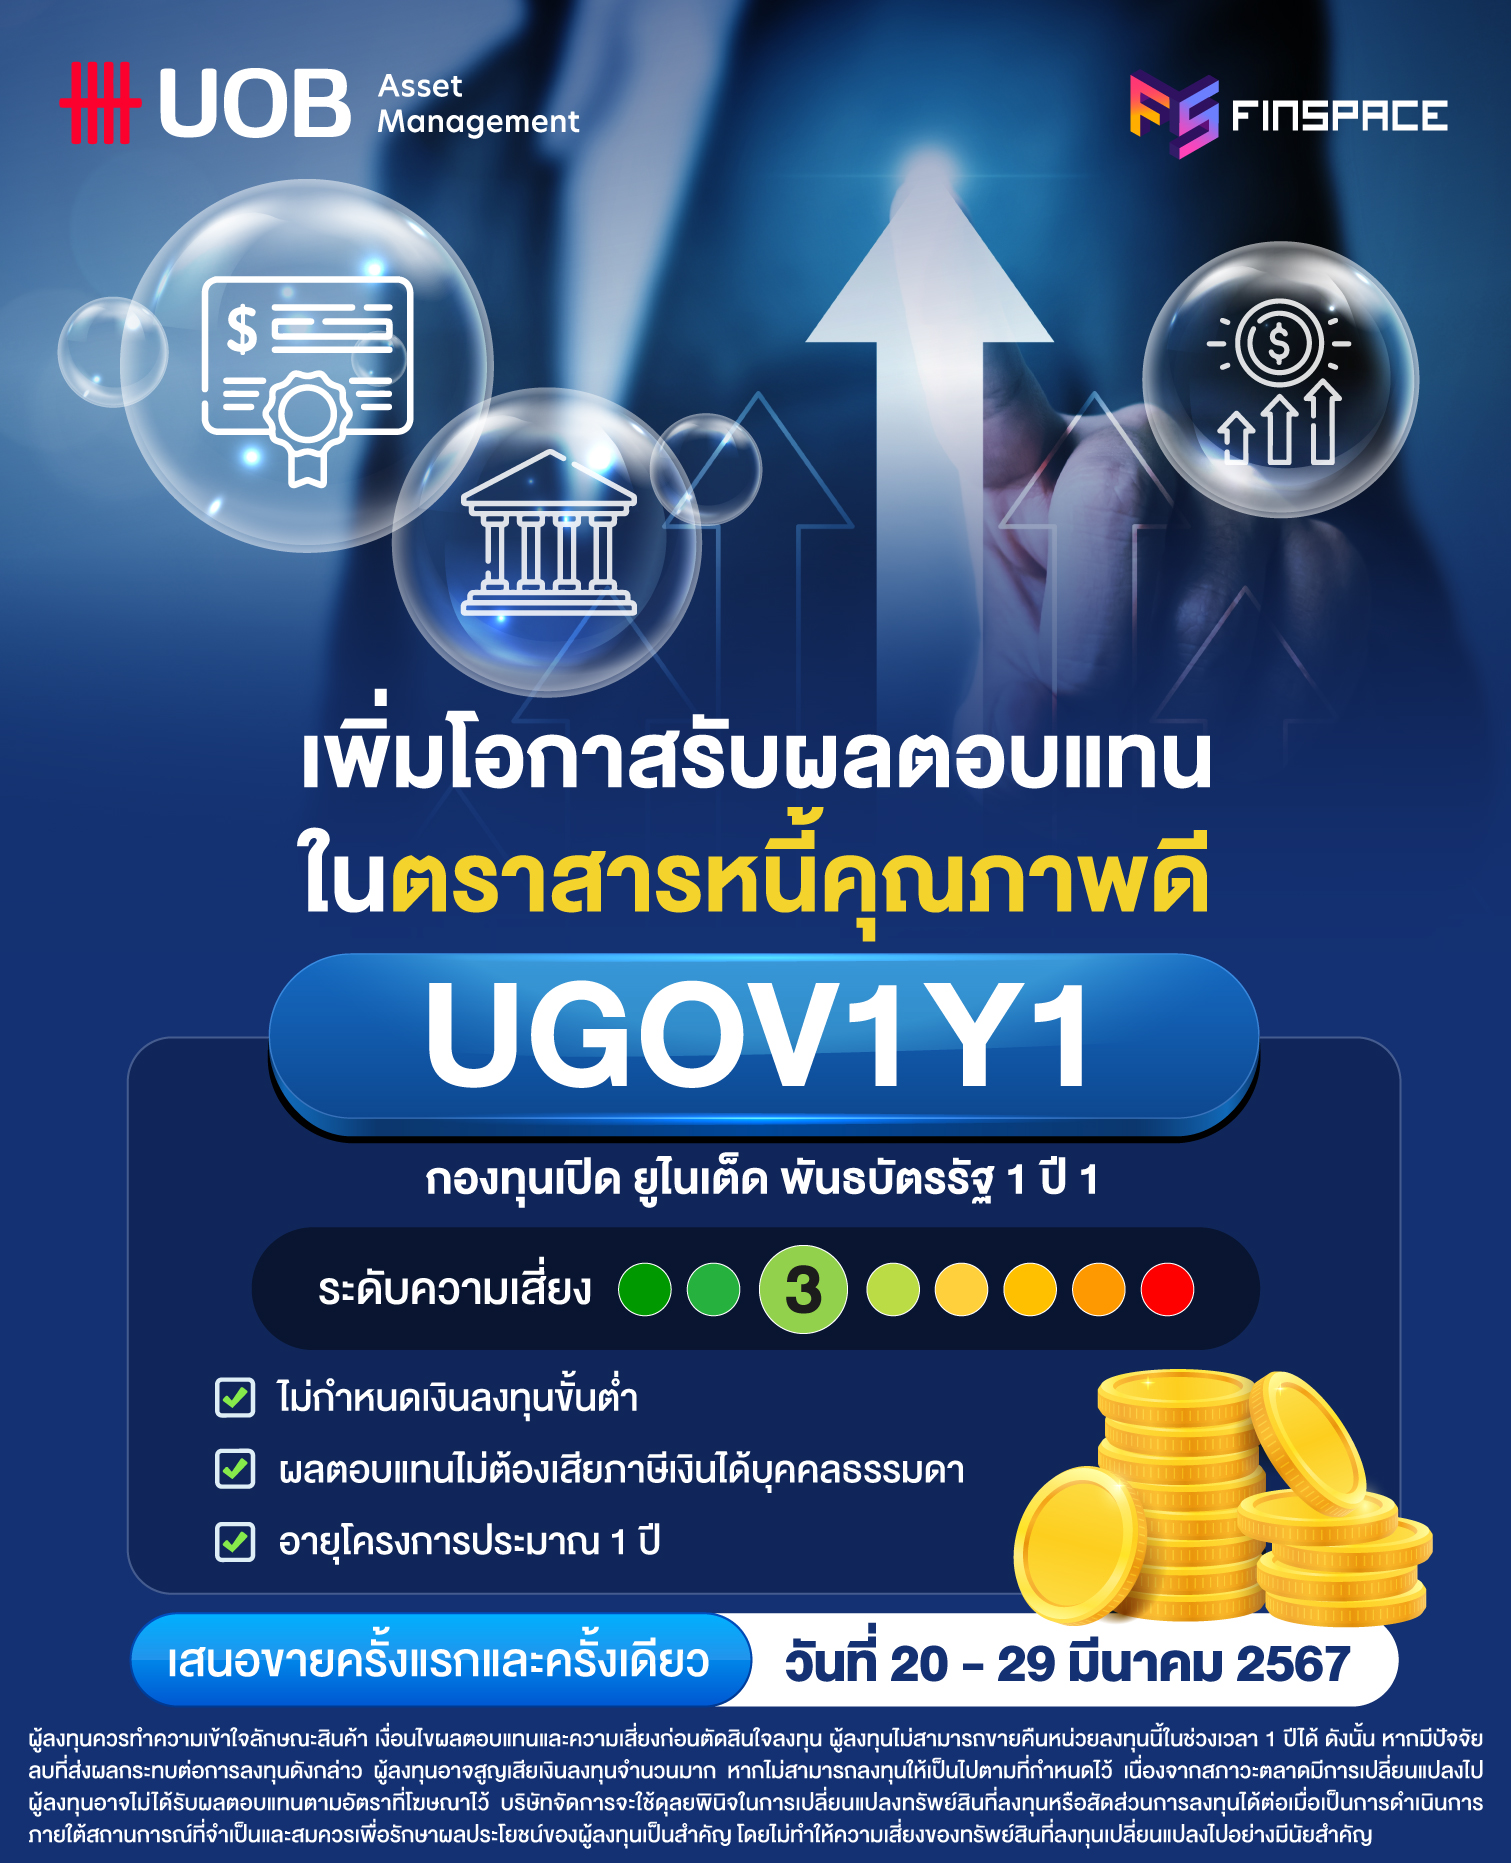 UOBAM UGOV1Y1 กอง IPO revised